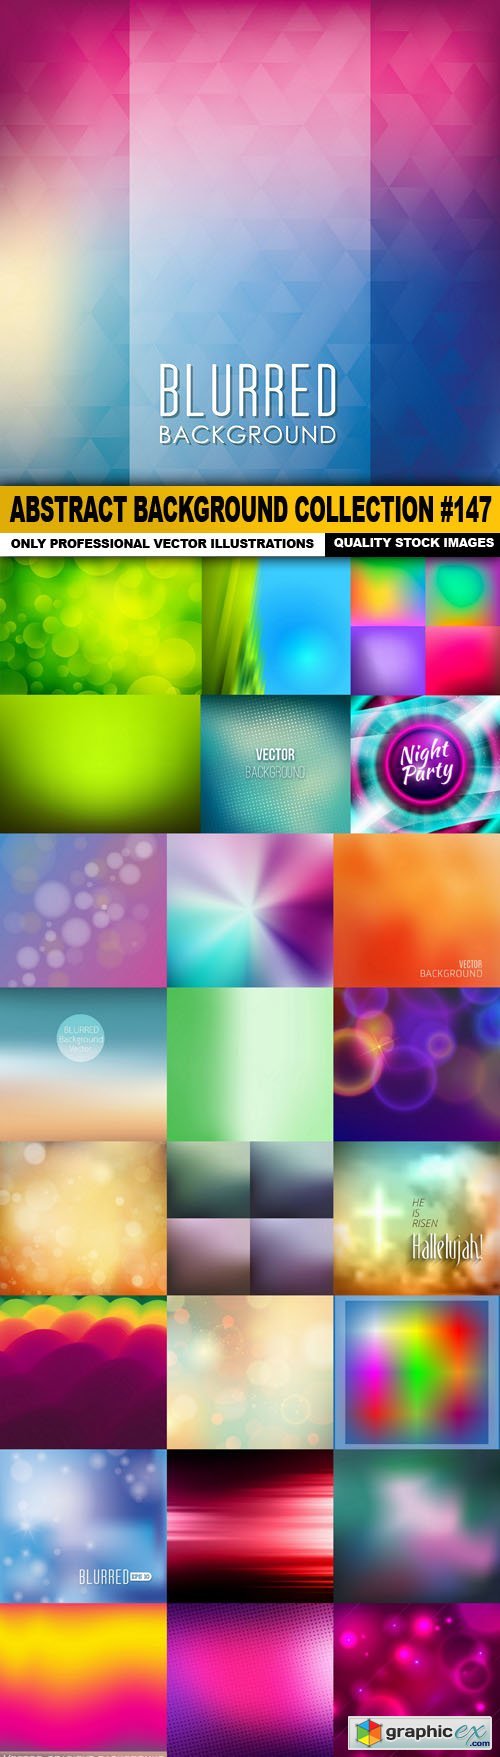 Abstract Background Collection #147